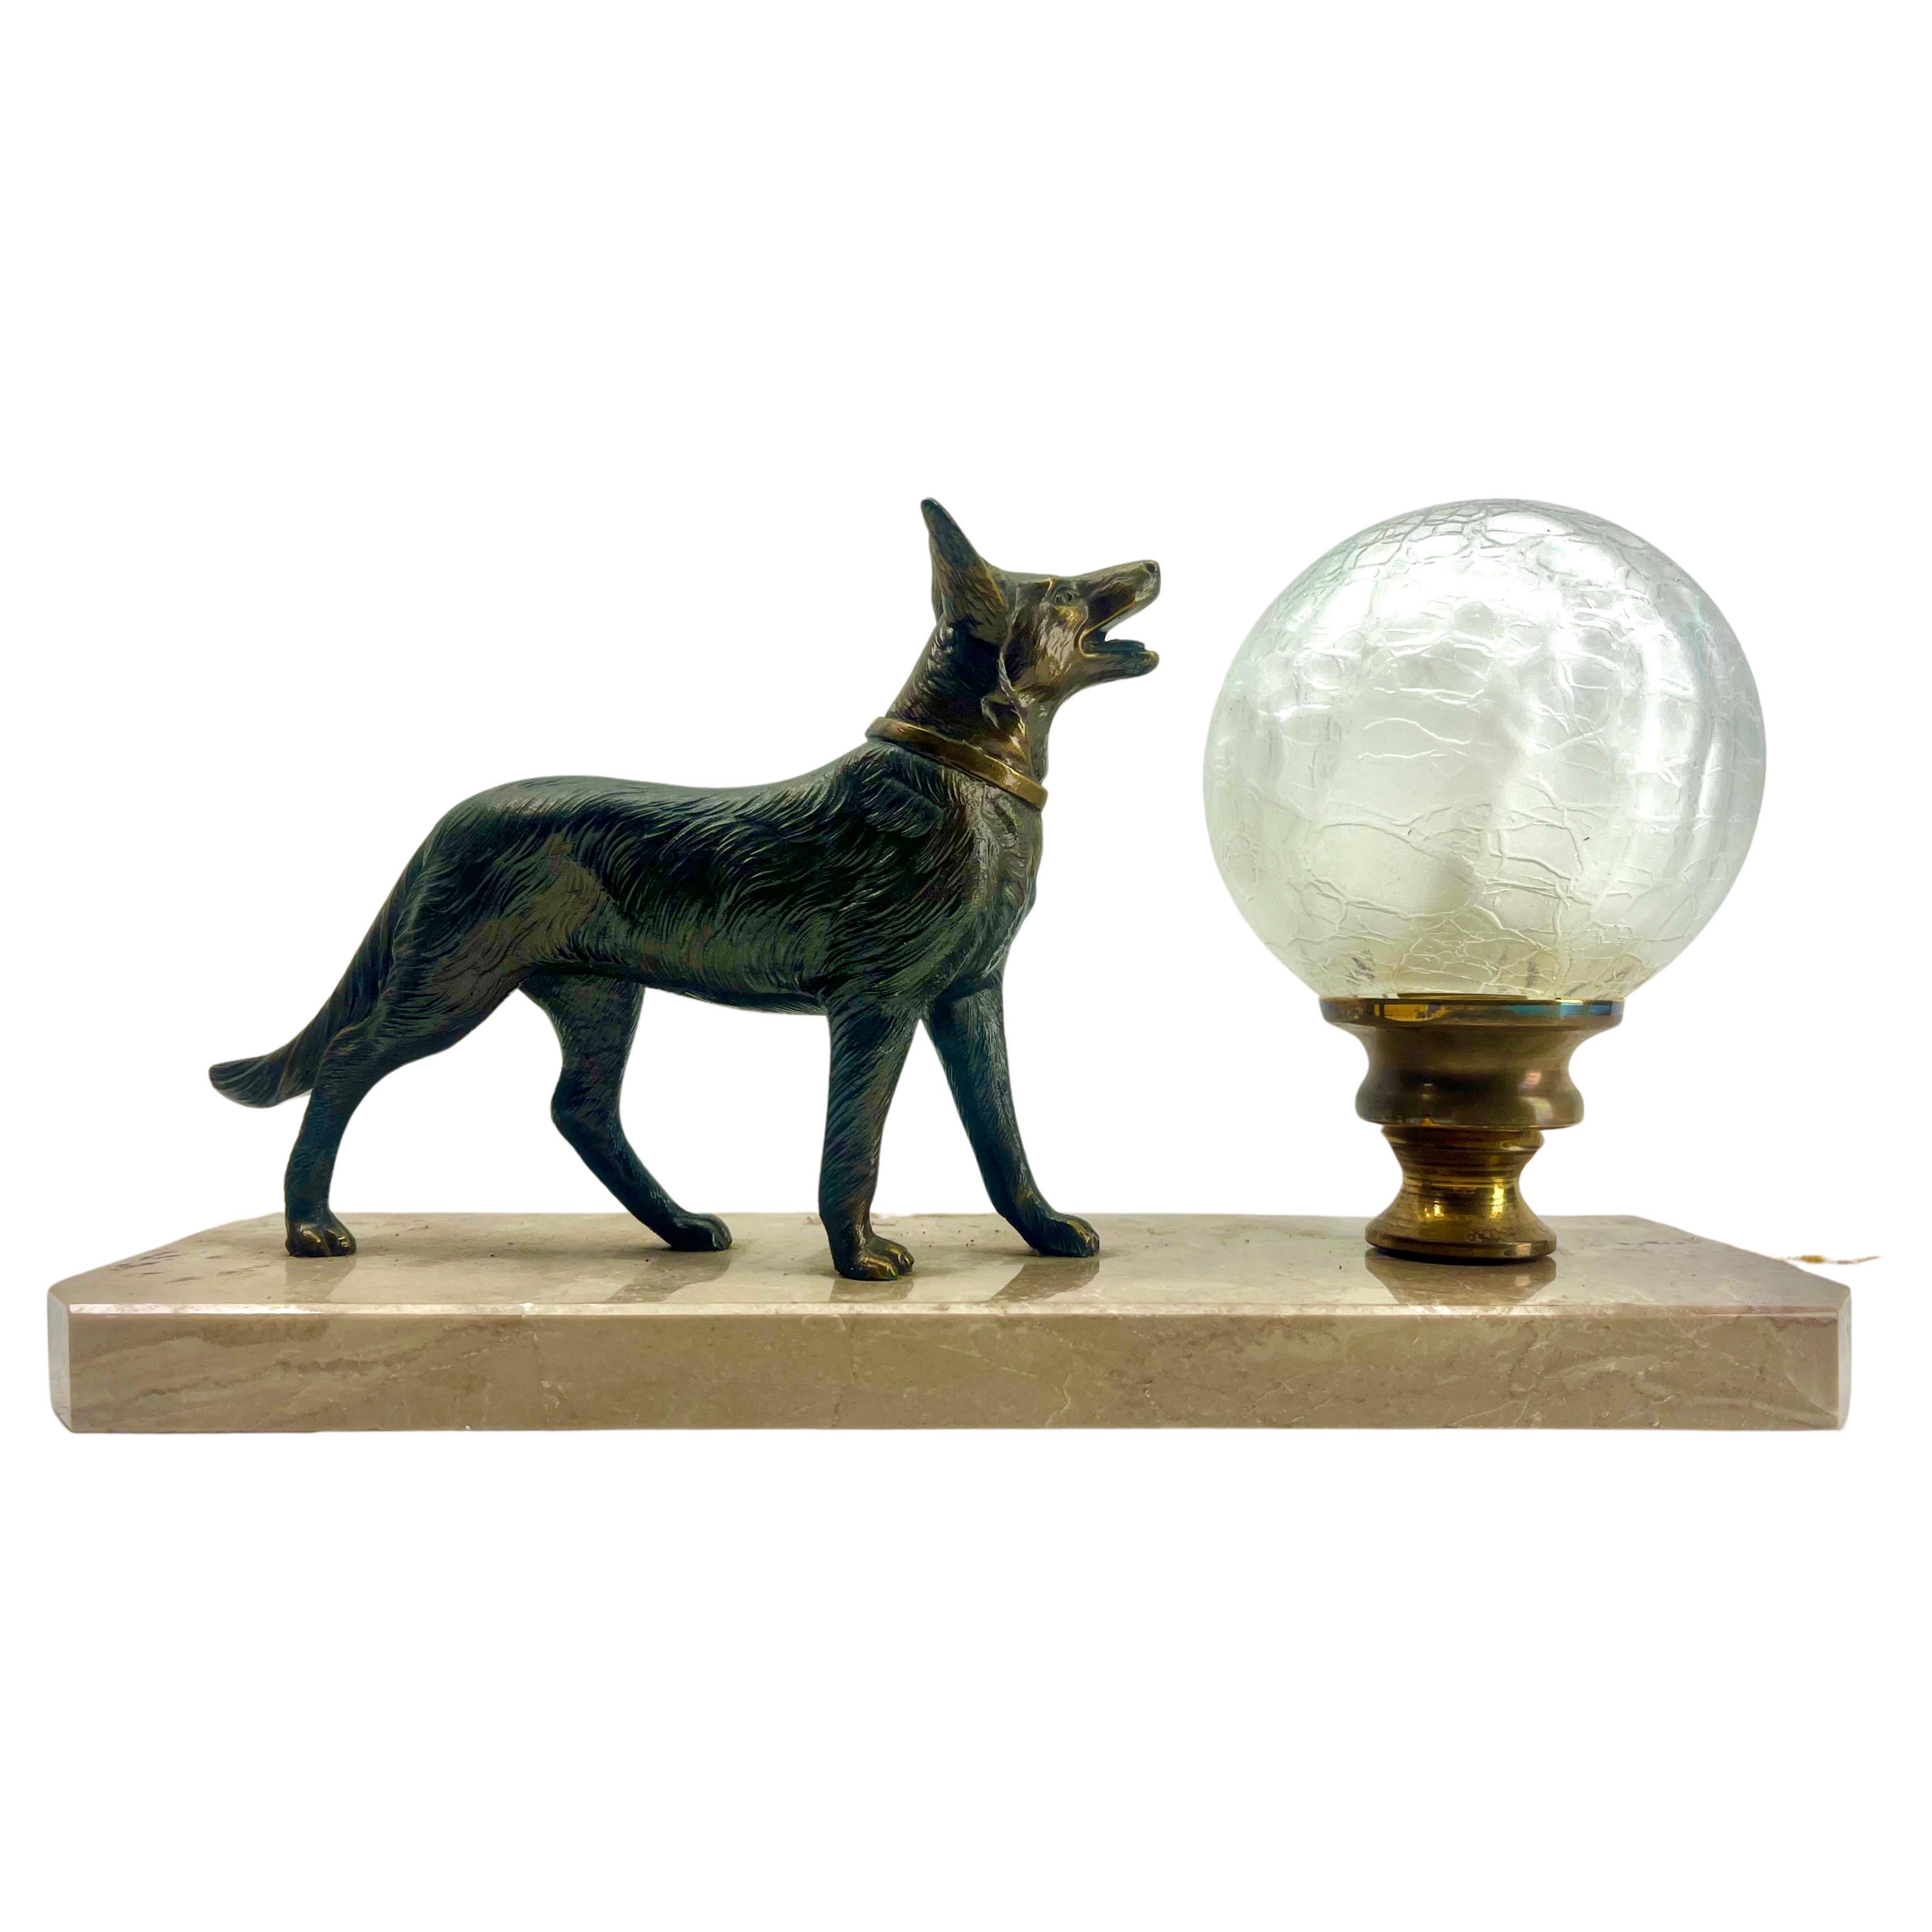 Stunning French Art Deco table lamp Gorgeous glass globe shade.
With Spelter Dog motif. Sitting on a marble base. 
In excellent condition and in full working order. 
Rewiring and Fitting E14
Originel Patina on all Parts
The piece is in Good and